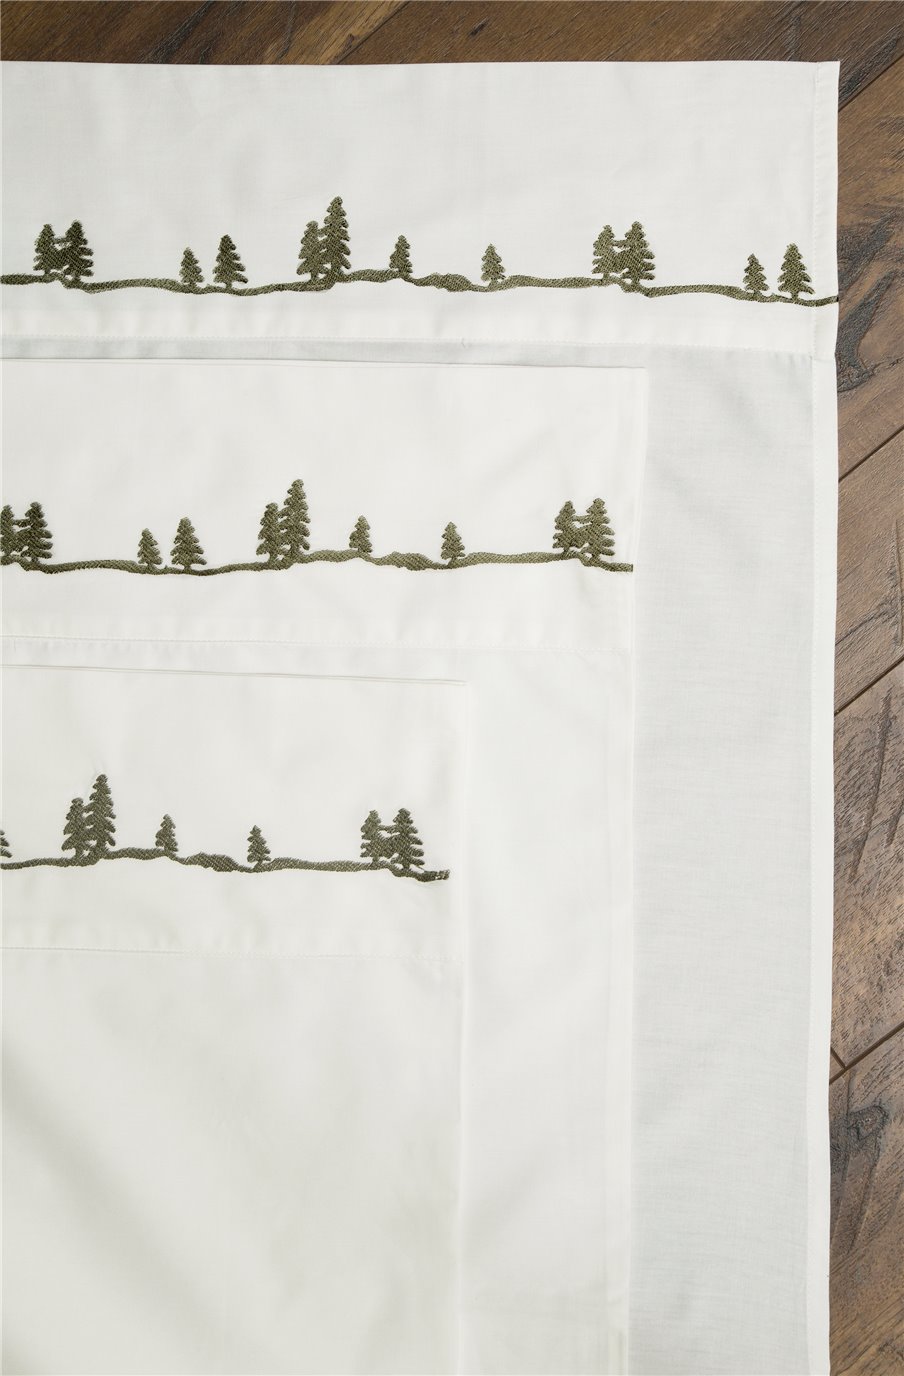 Carstens Embroidered Pines Rustic Sheet Set, Queen